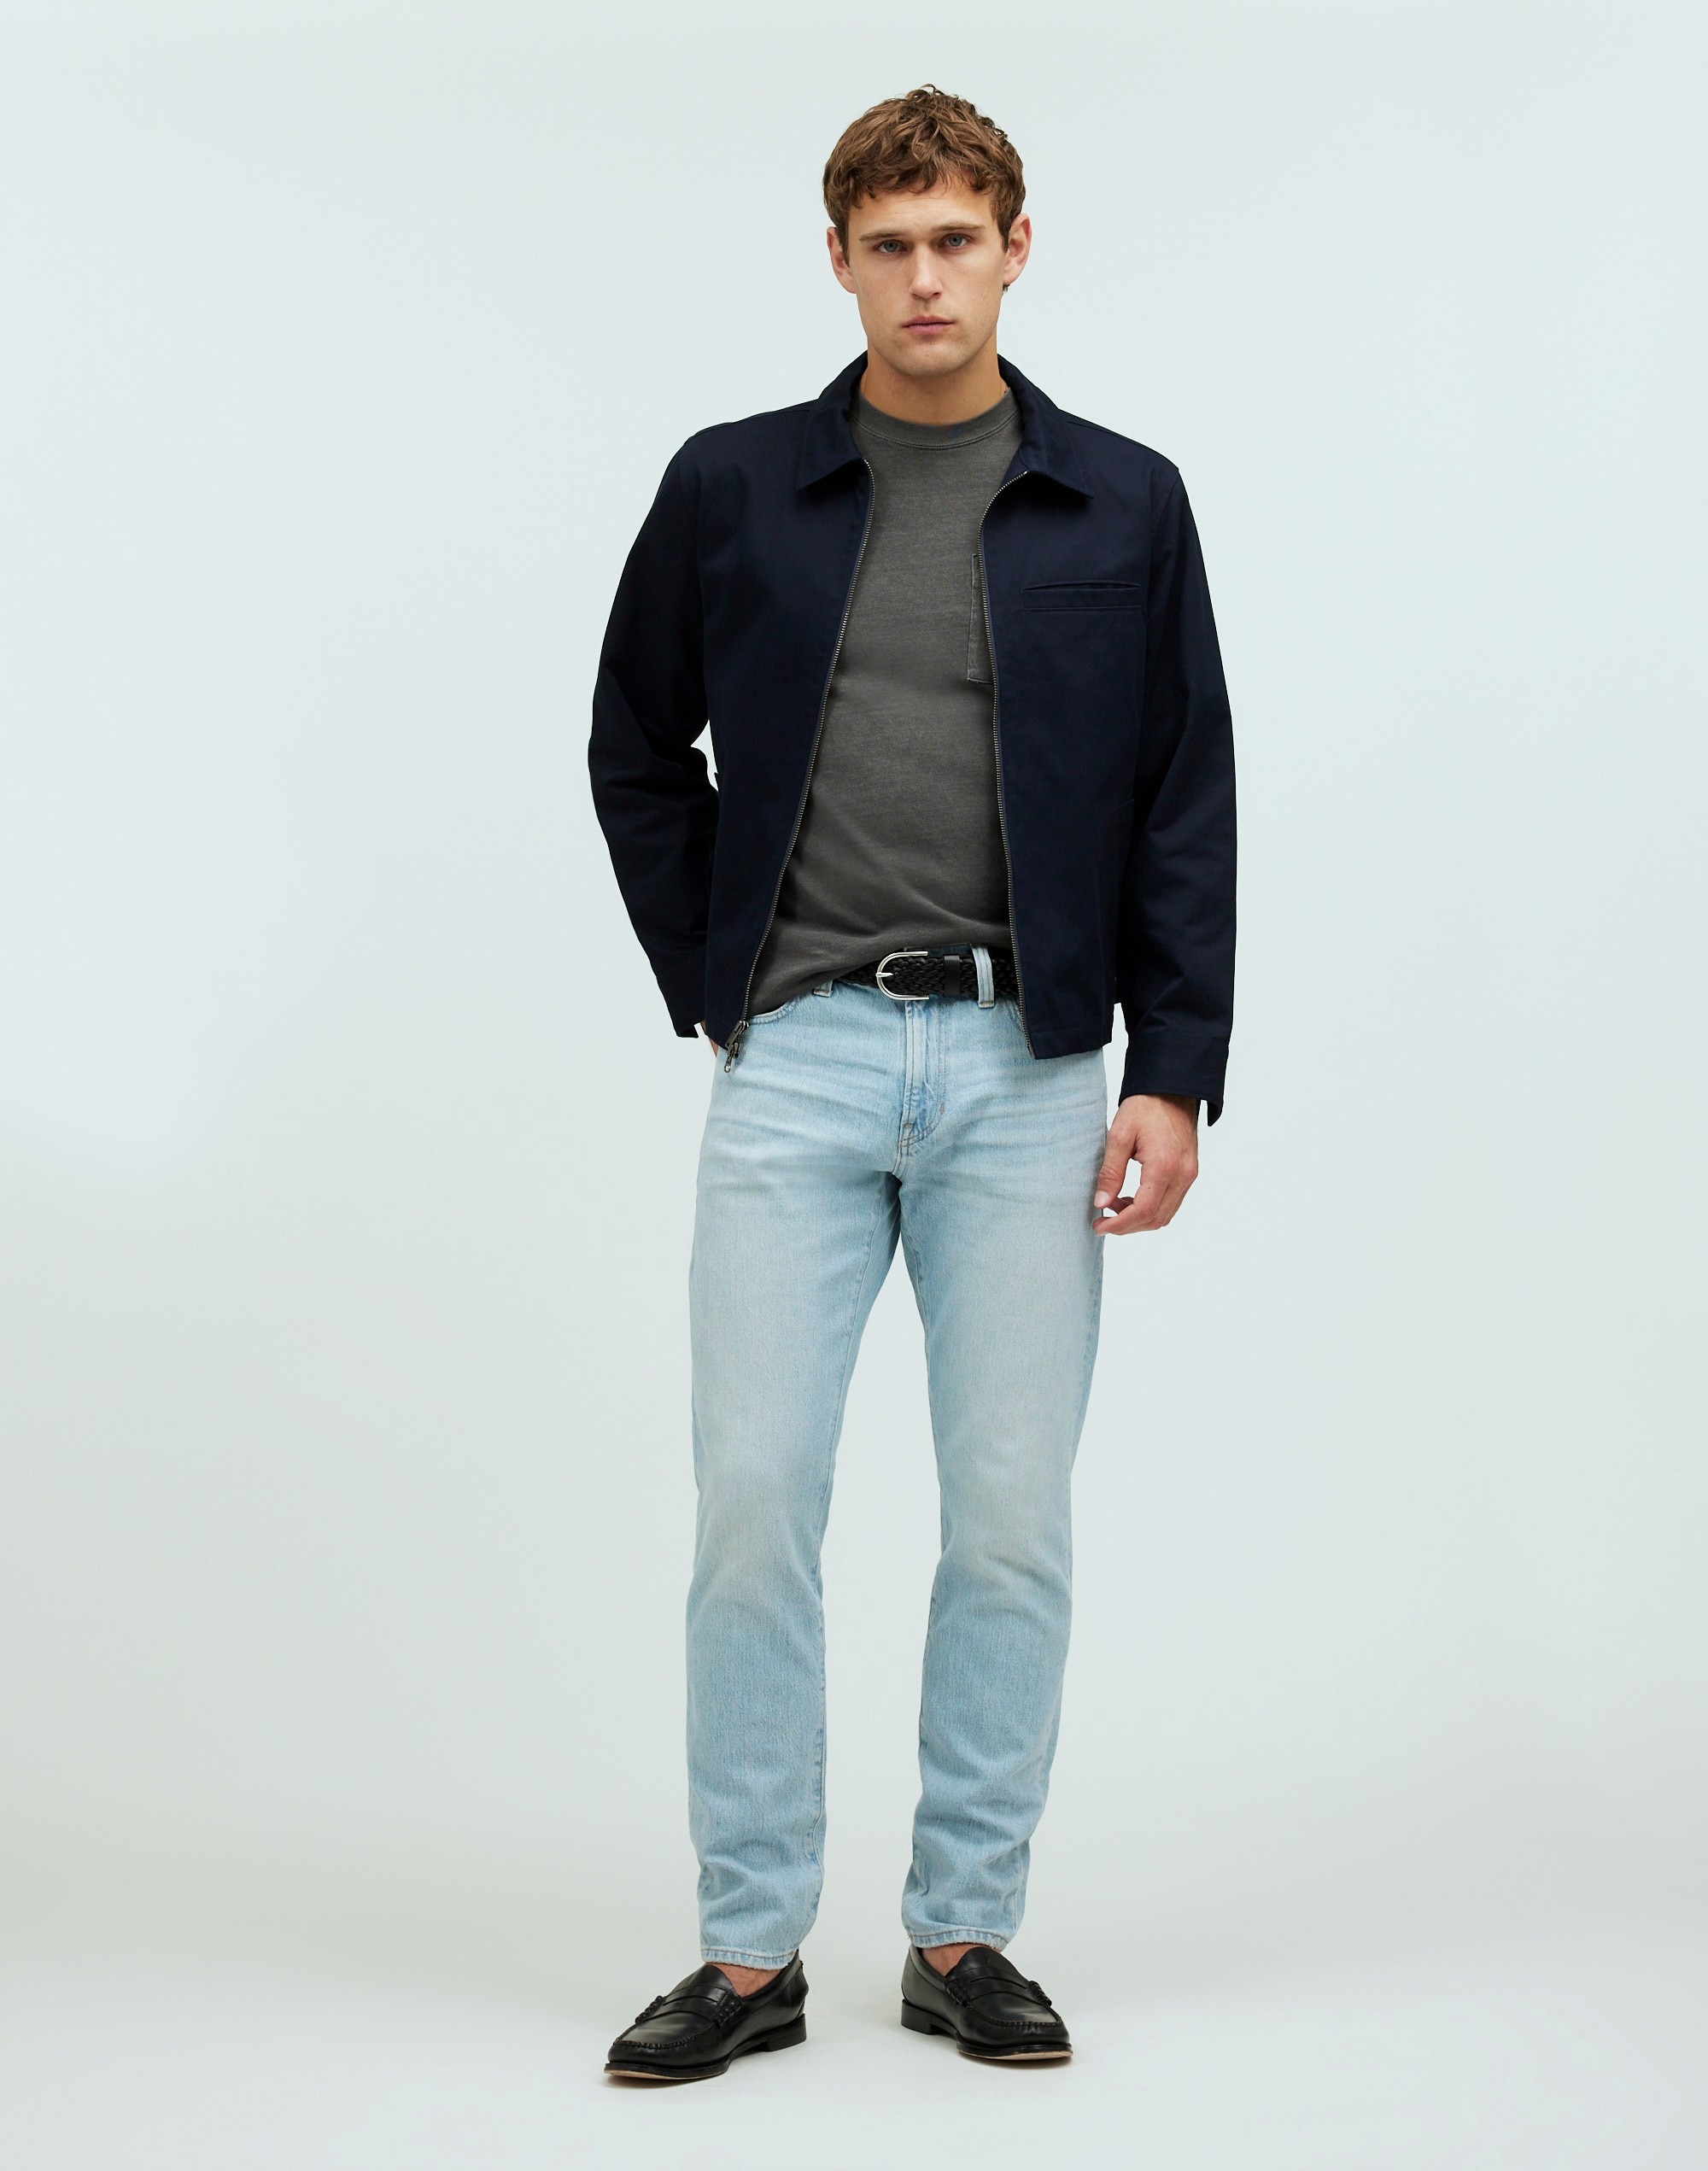 Mw Slim Jeans In Brantwood Wash